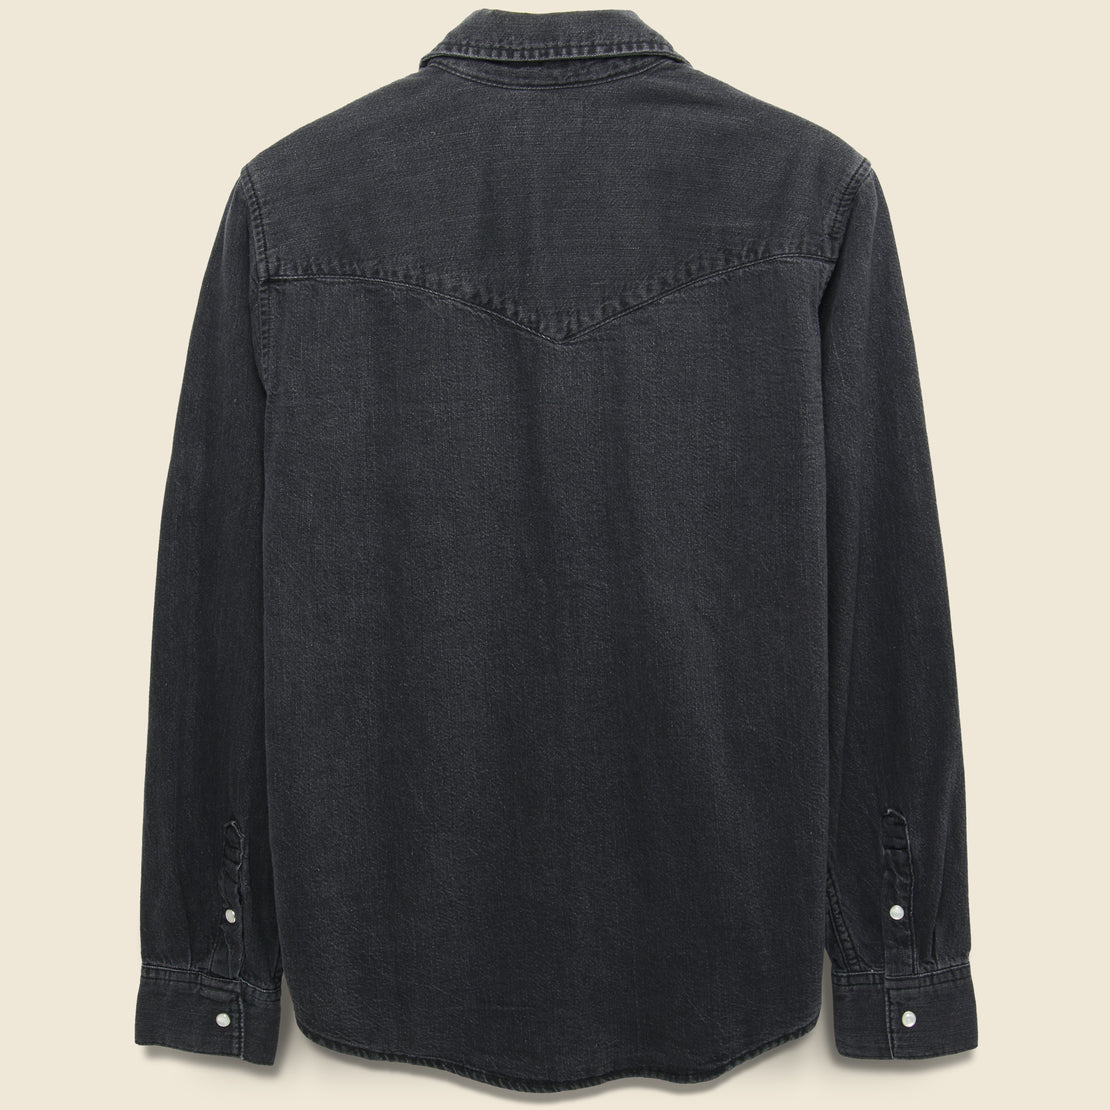 Essential Western Shirt - Black Sheep - Levis Premium - STAG Provisions - W - Tops - L/S Woven